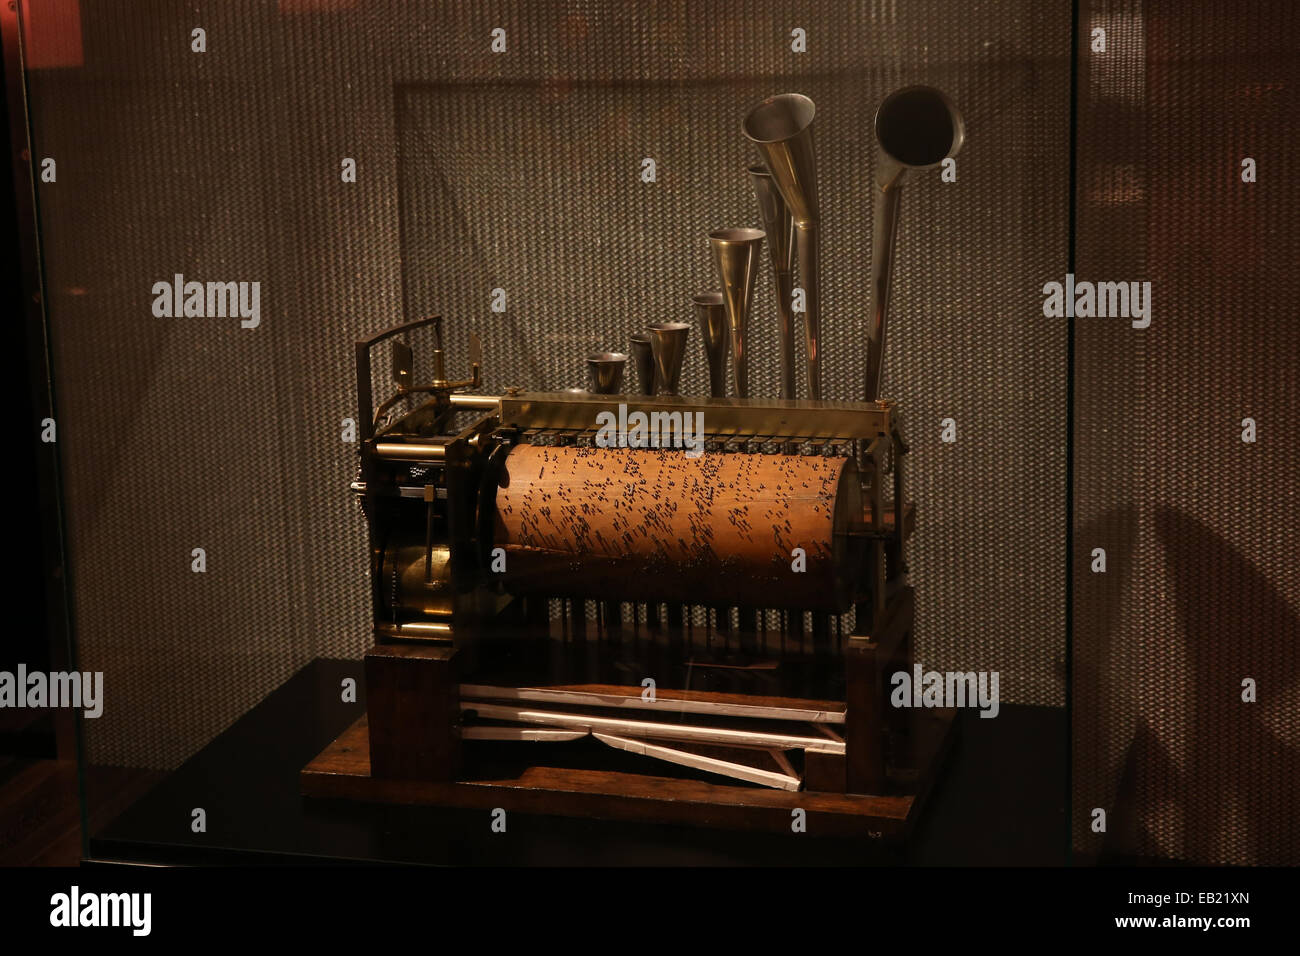 Vintage music player all'interno del museo Foto Stock